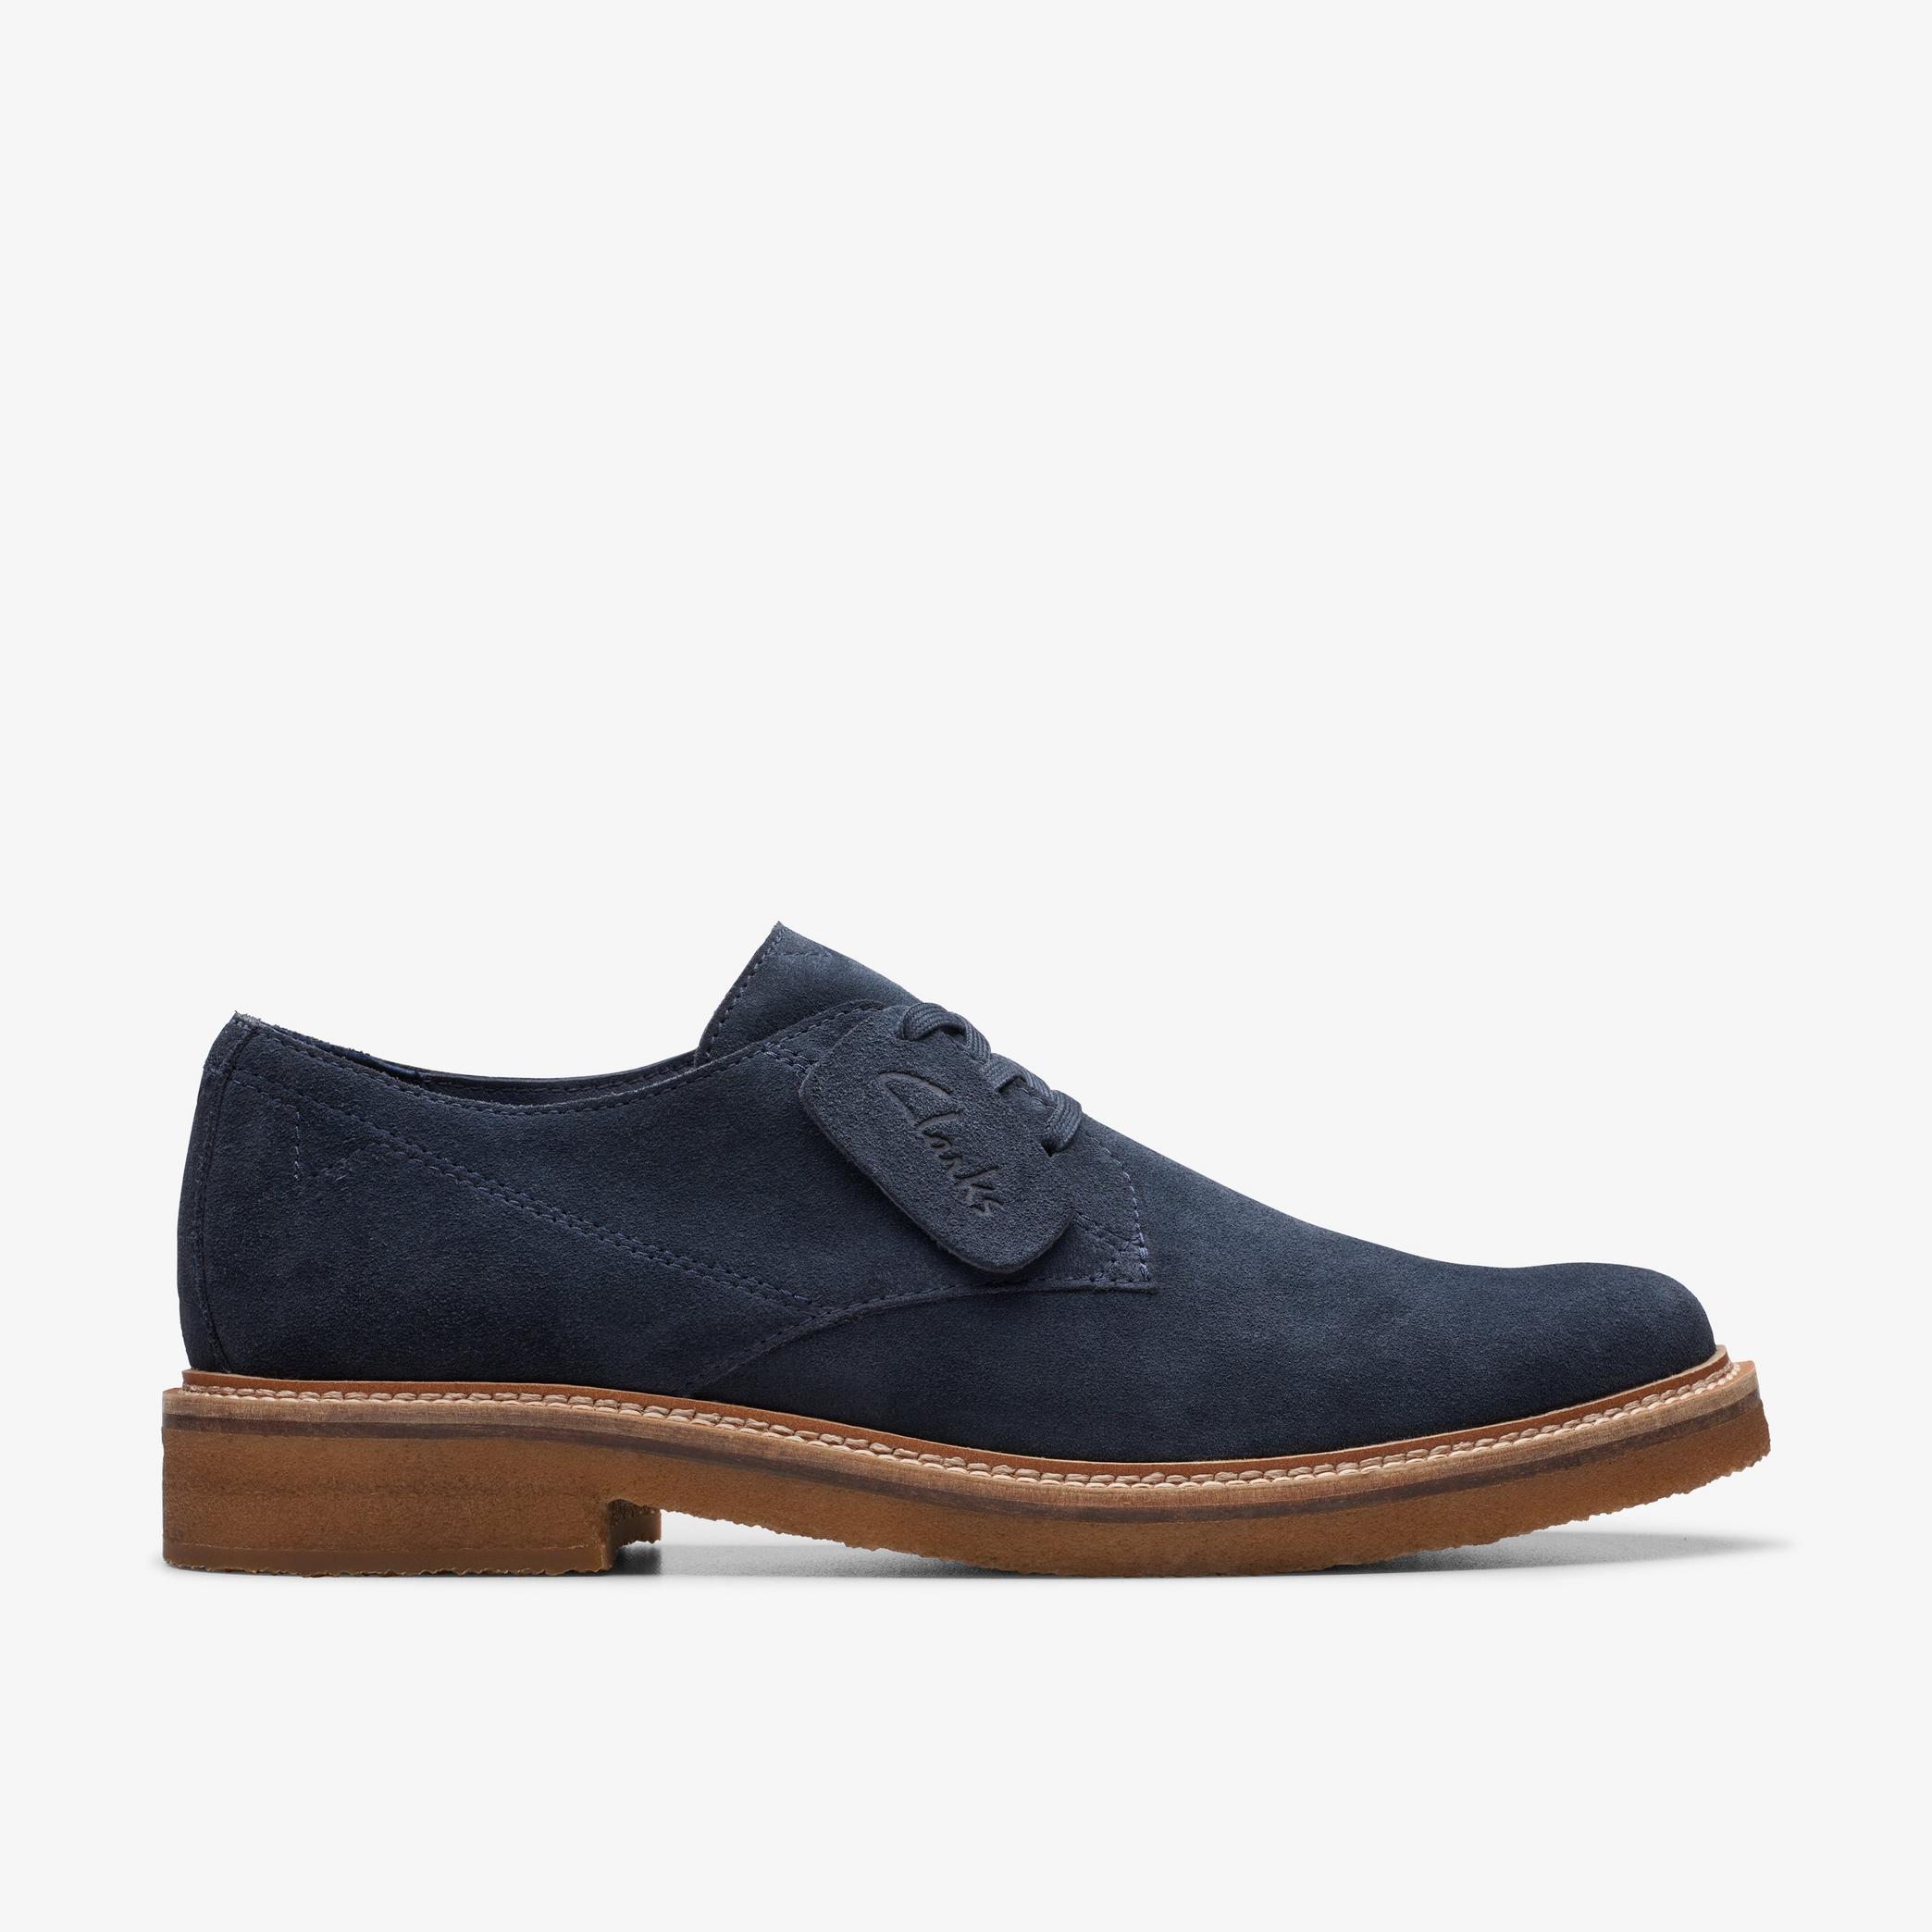 Clarkdale Derby Navy Suede Oxford Shoes, view 1 of 6